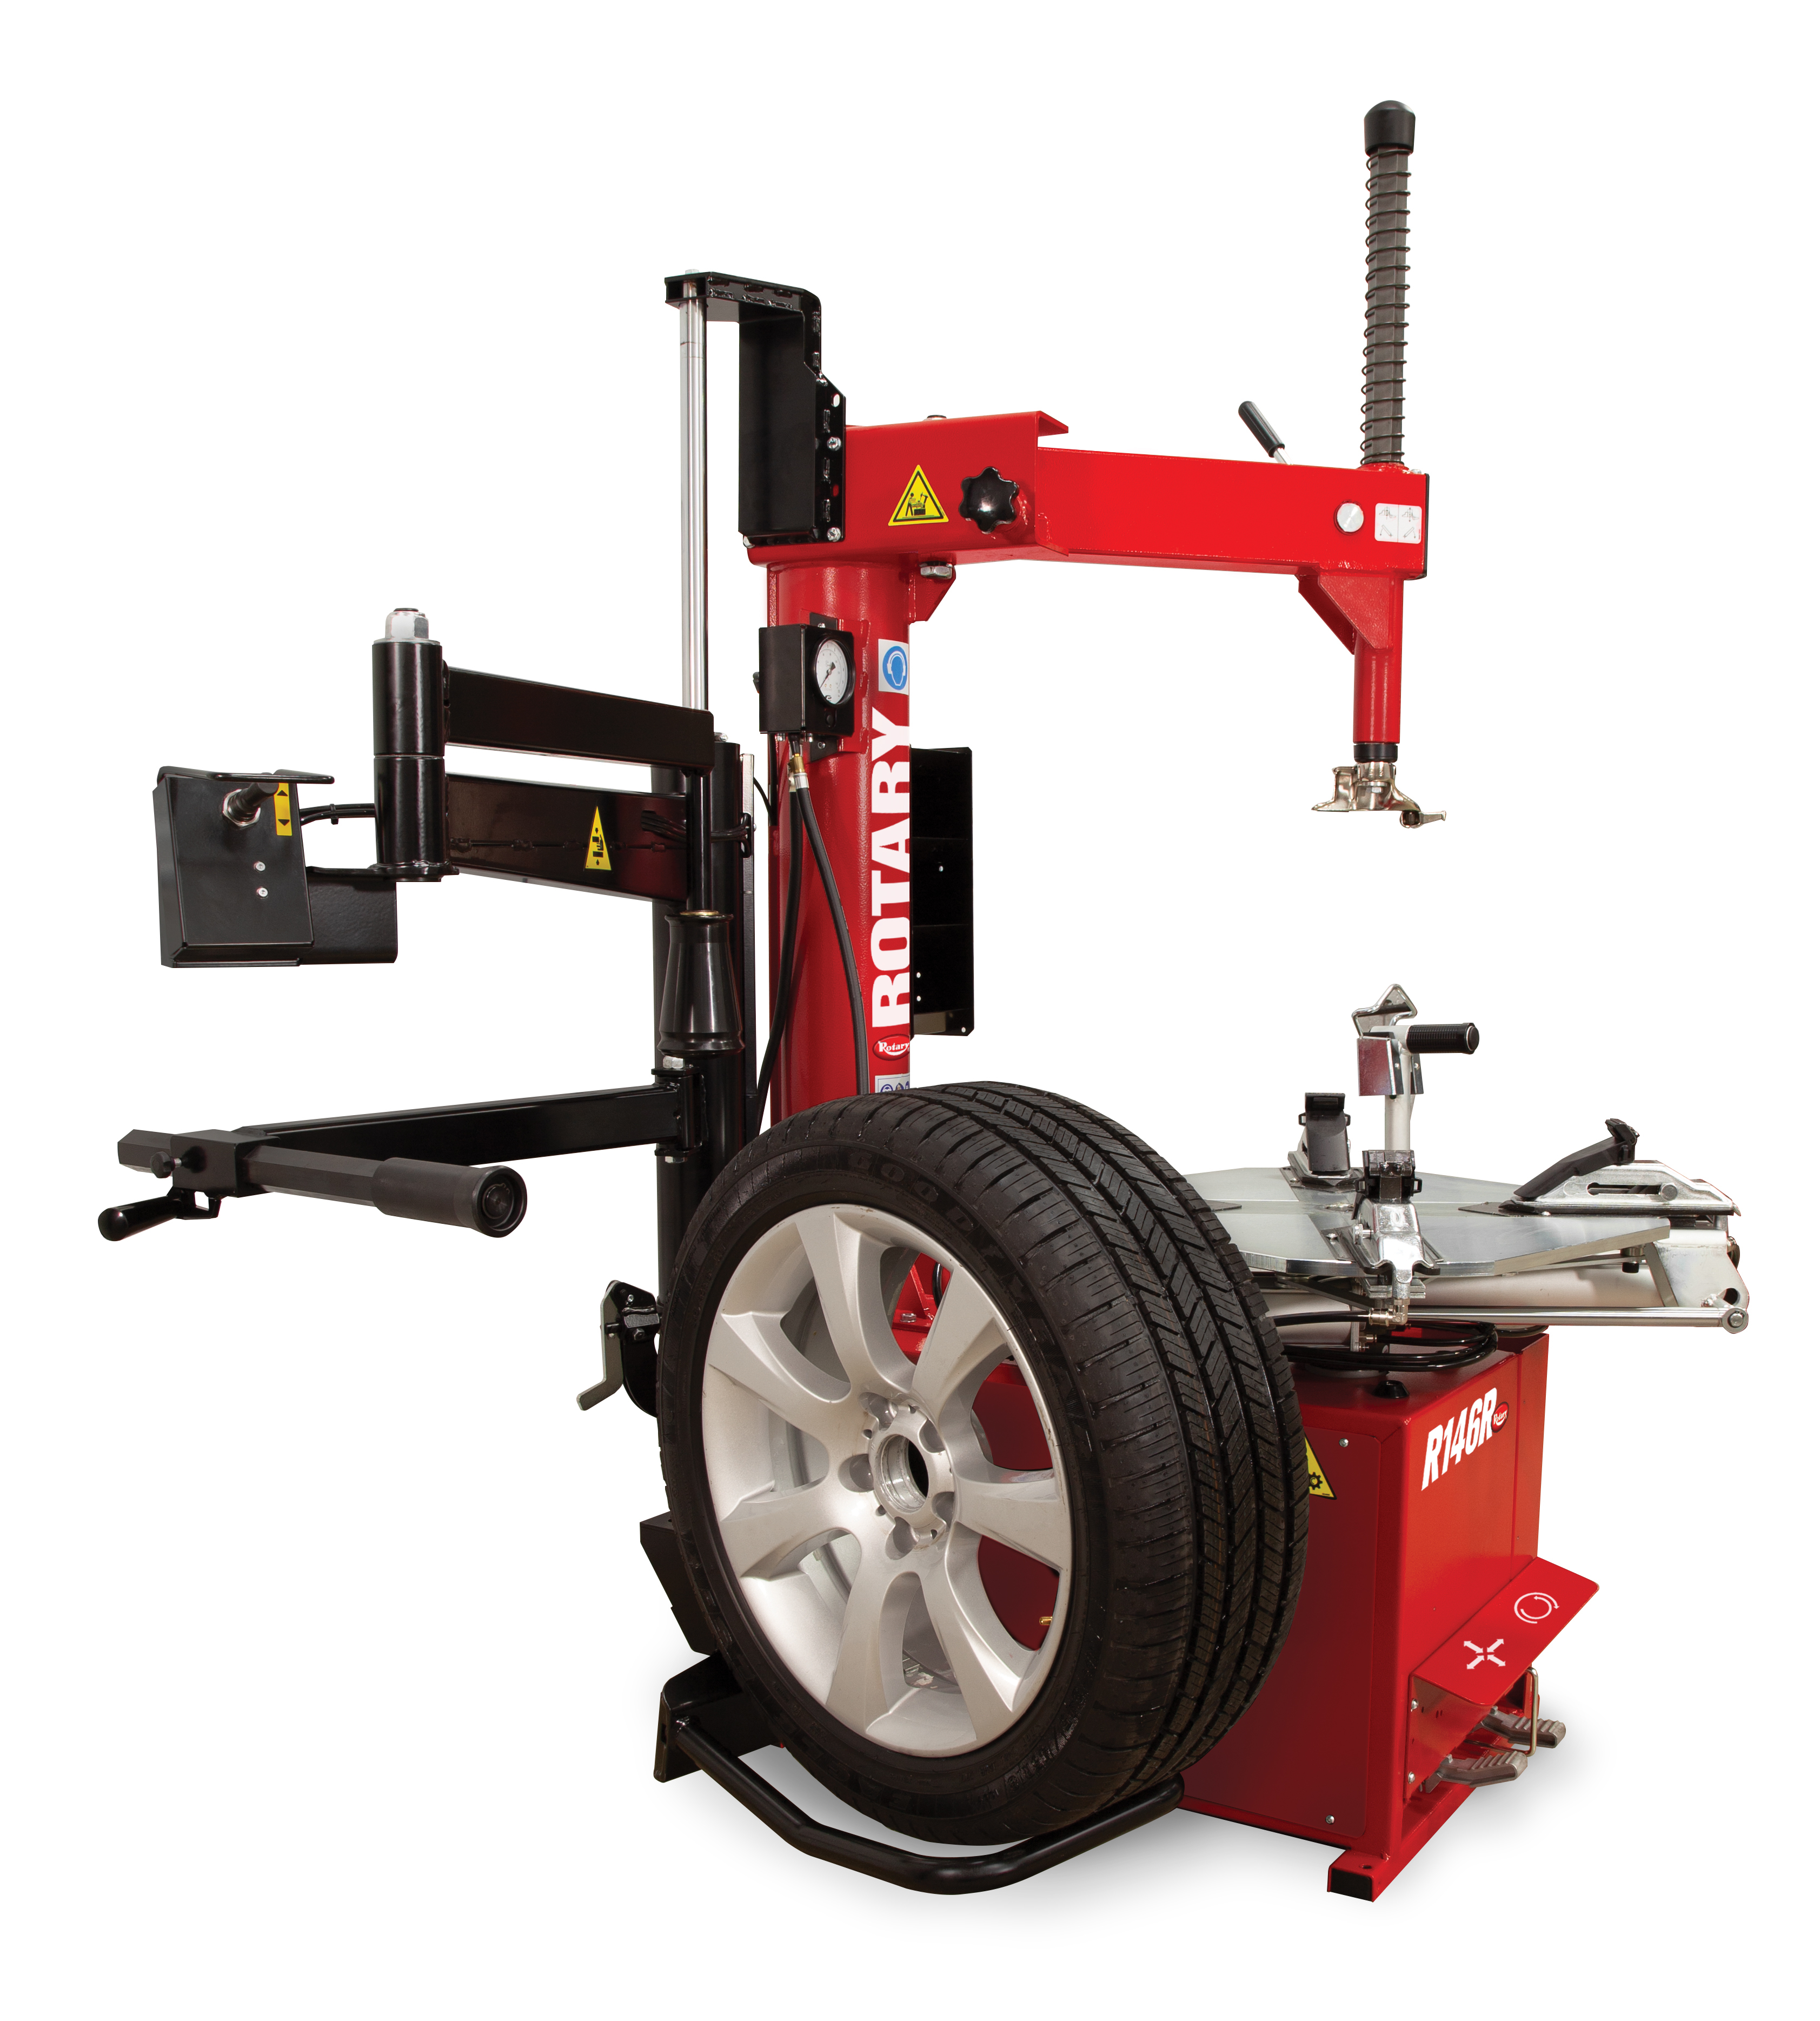 Rotary Lifts - R146 Super Tire Changer with lift -  RWC146RPS